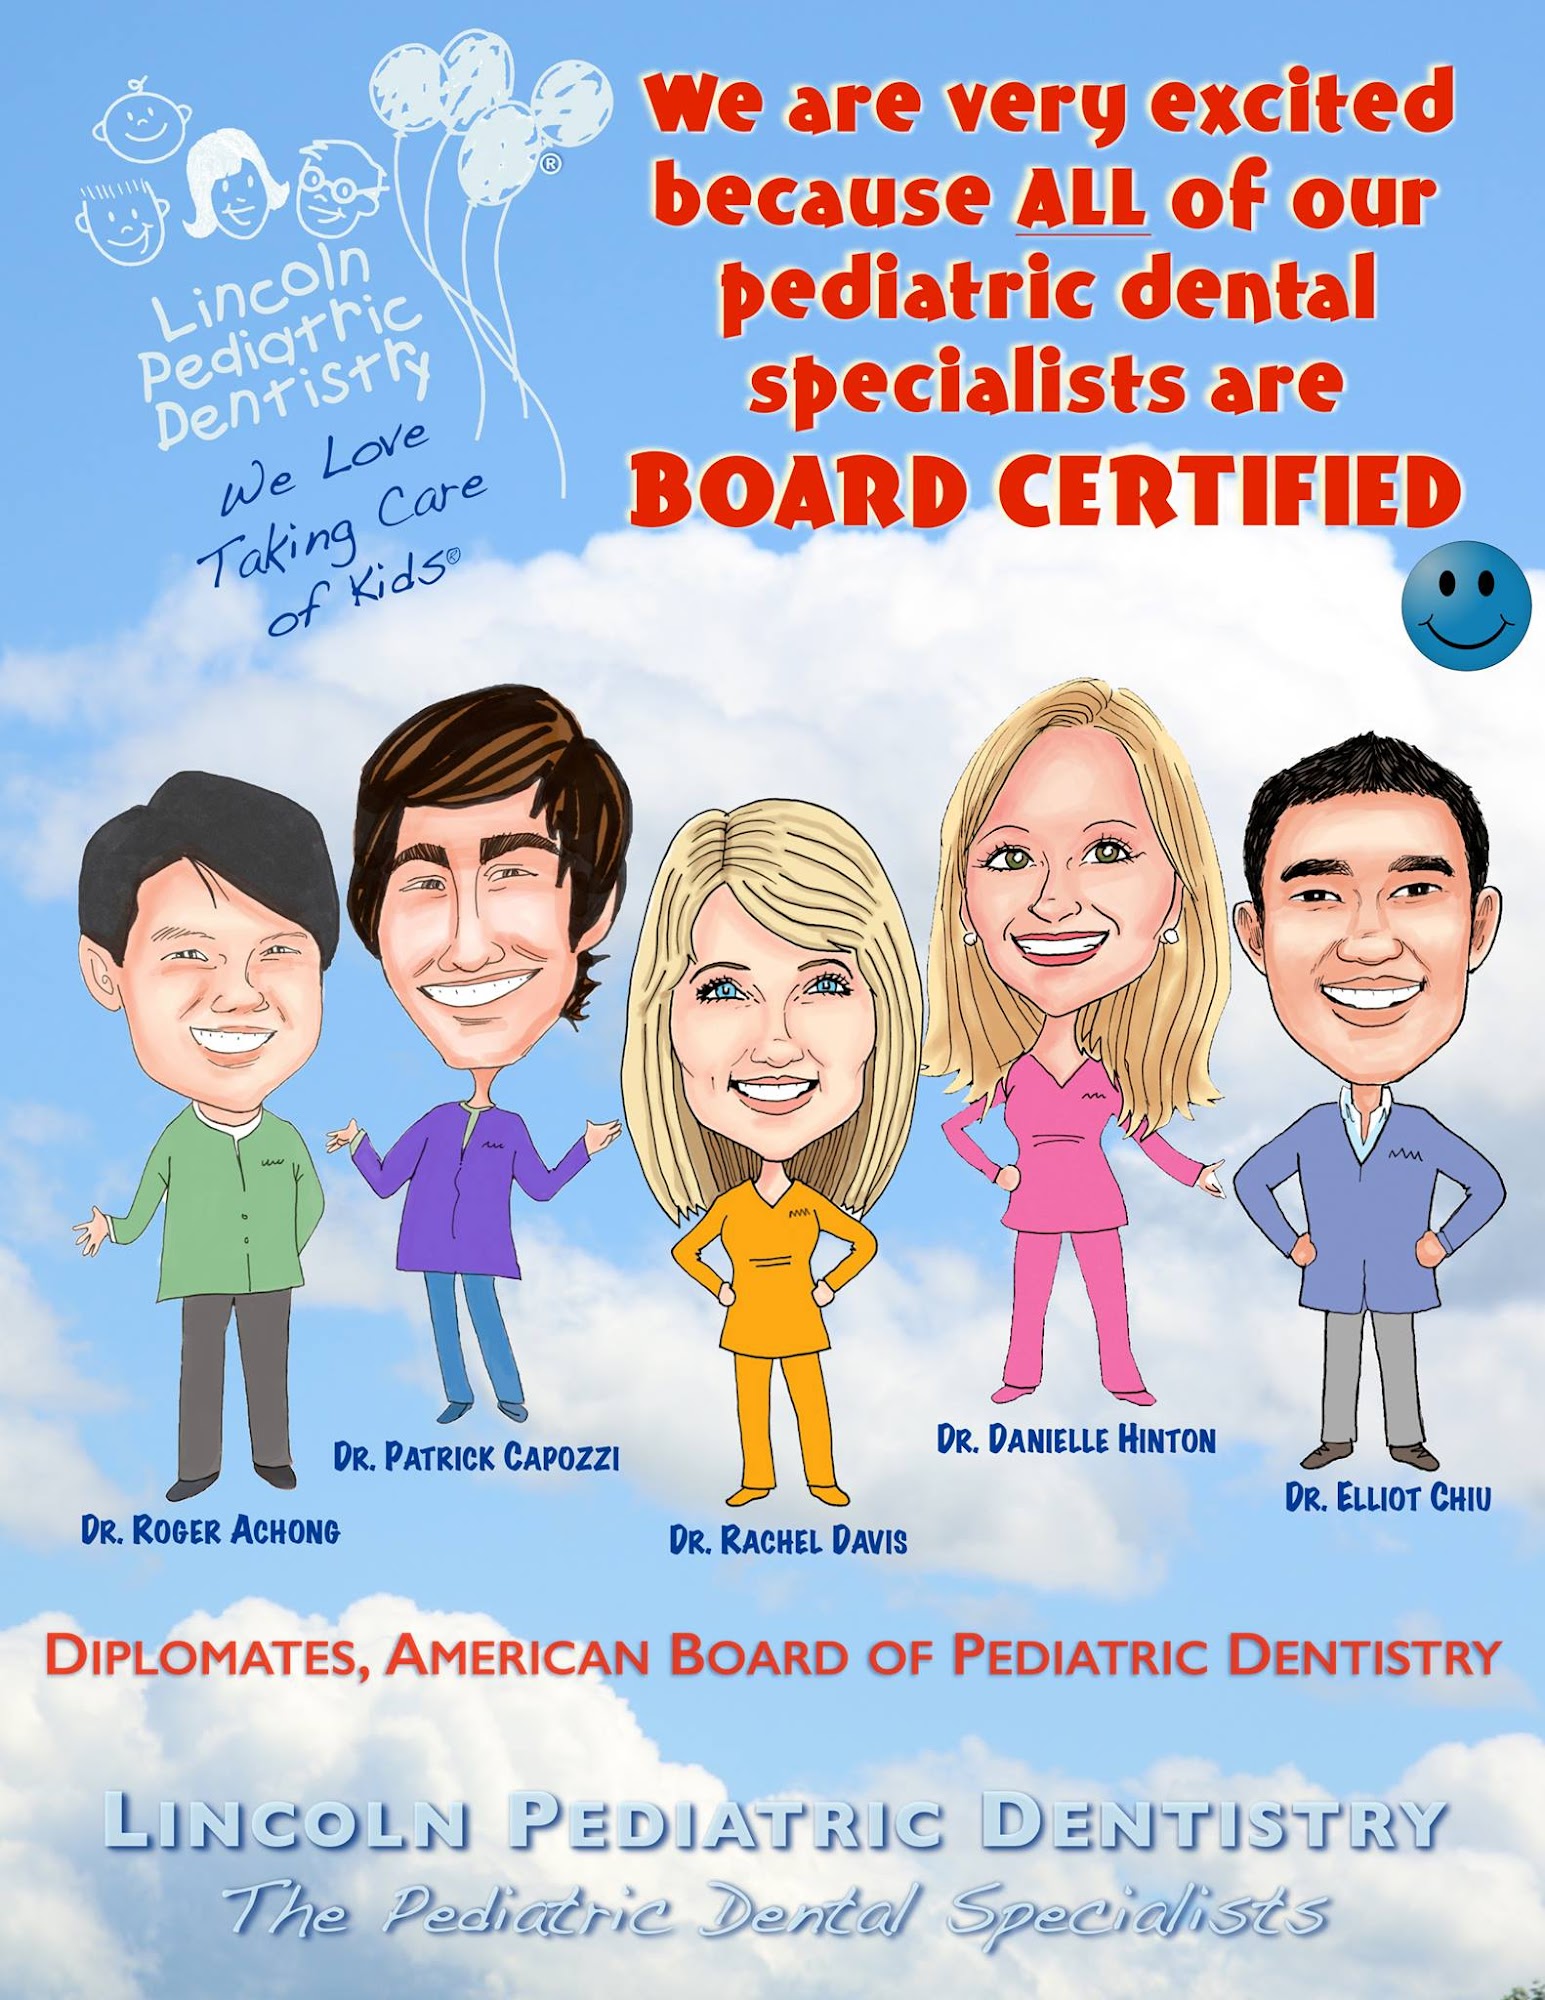 Lincoln Pediatric Dentistry The Village Shops, 25 S Mountain Dr, Lincoln New Hampshire 03251